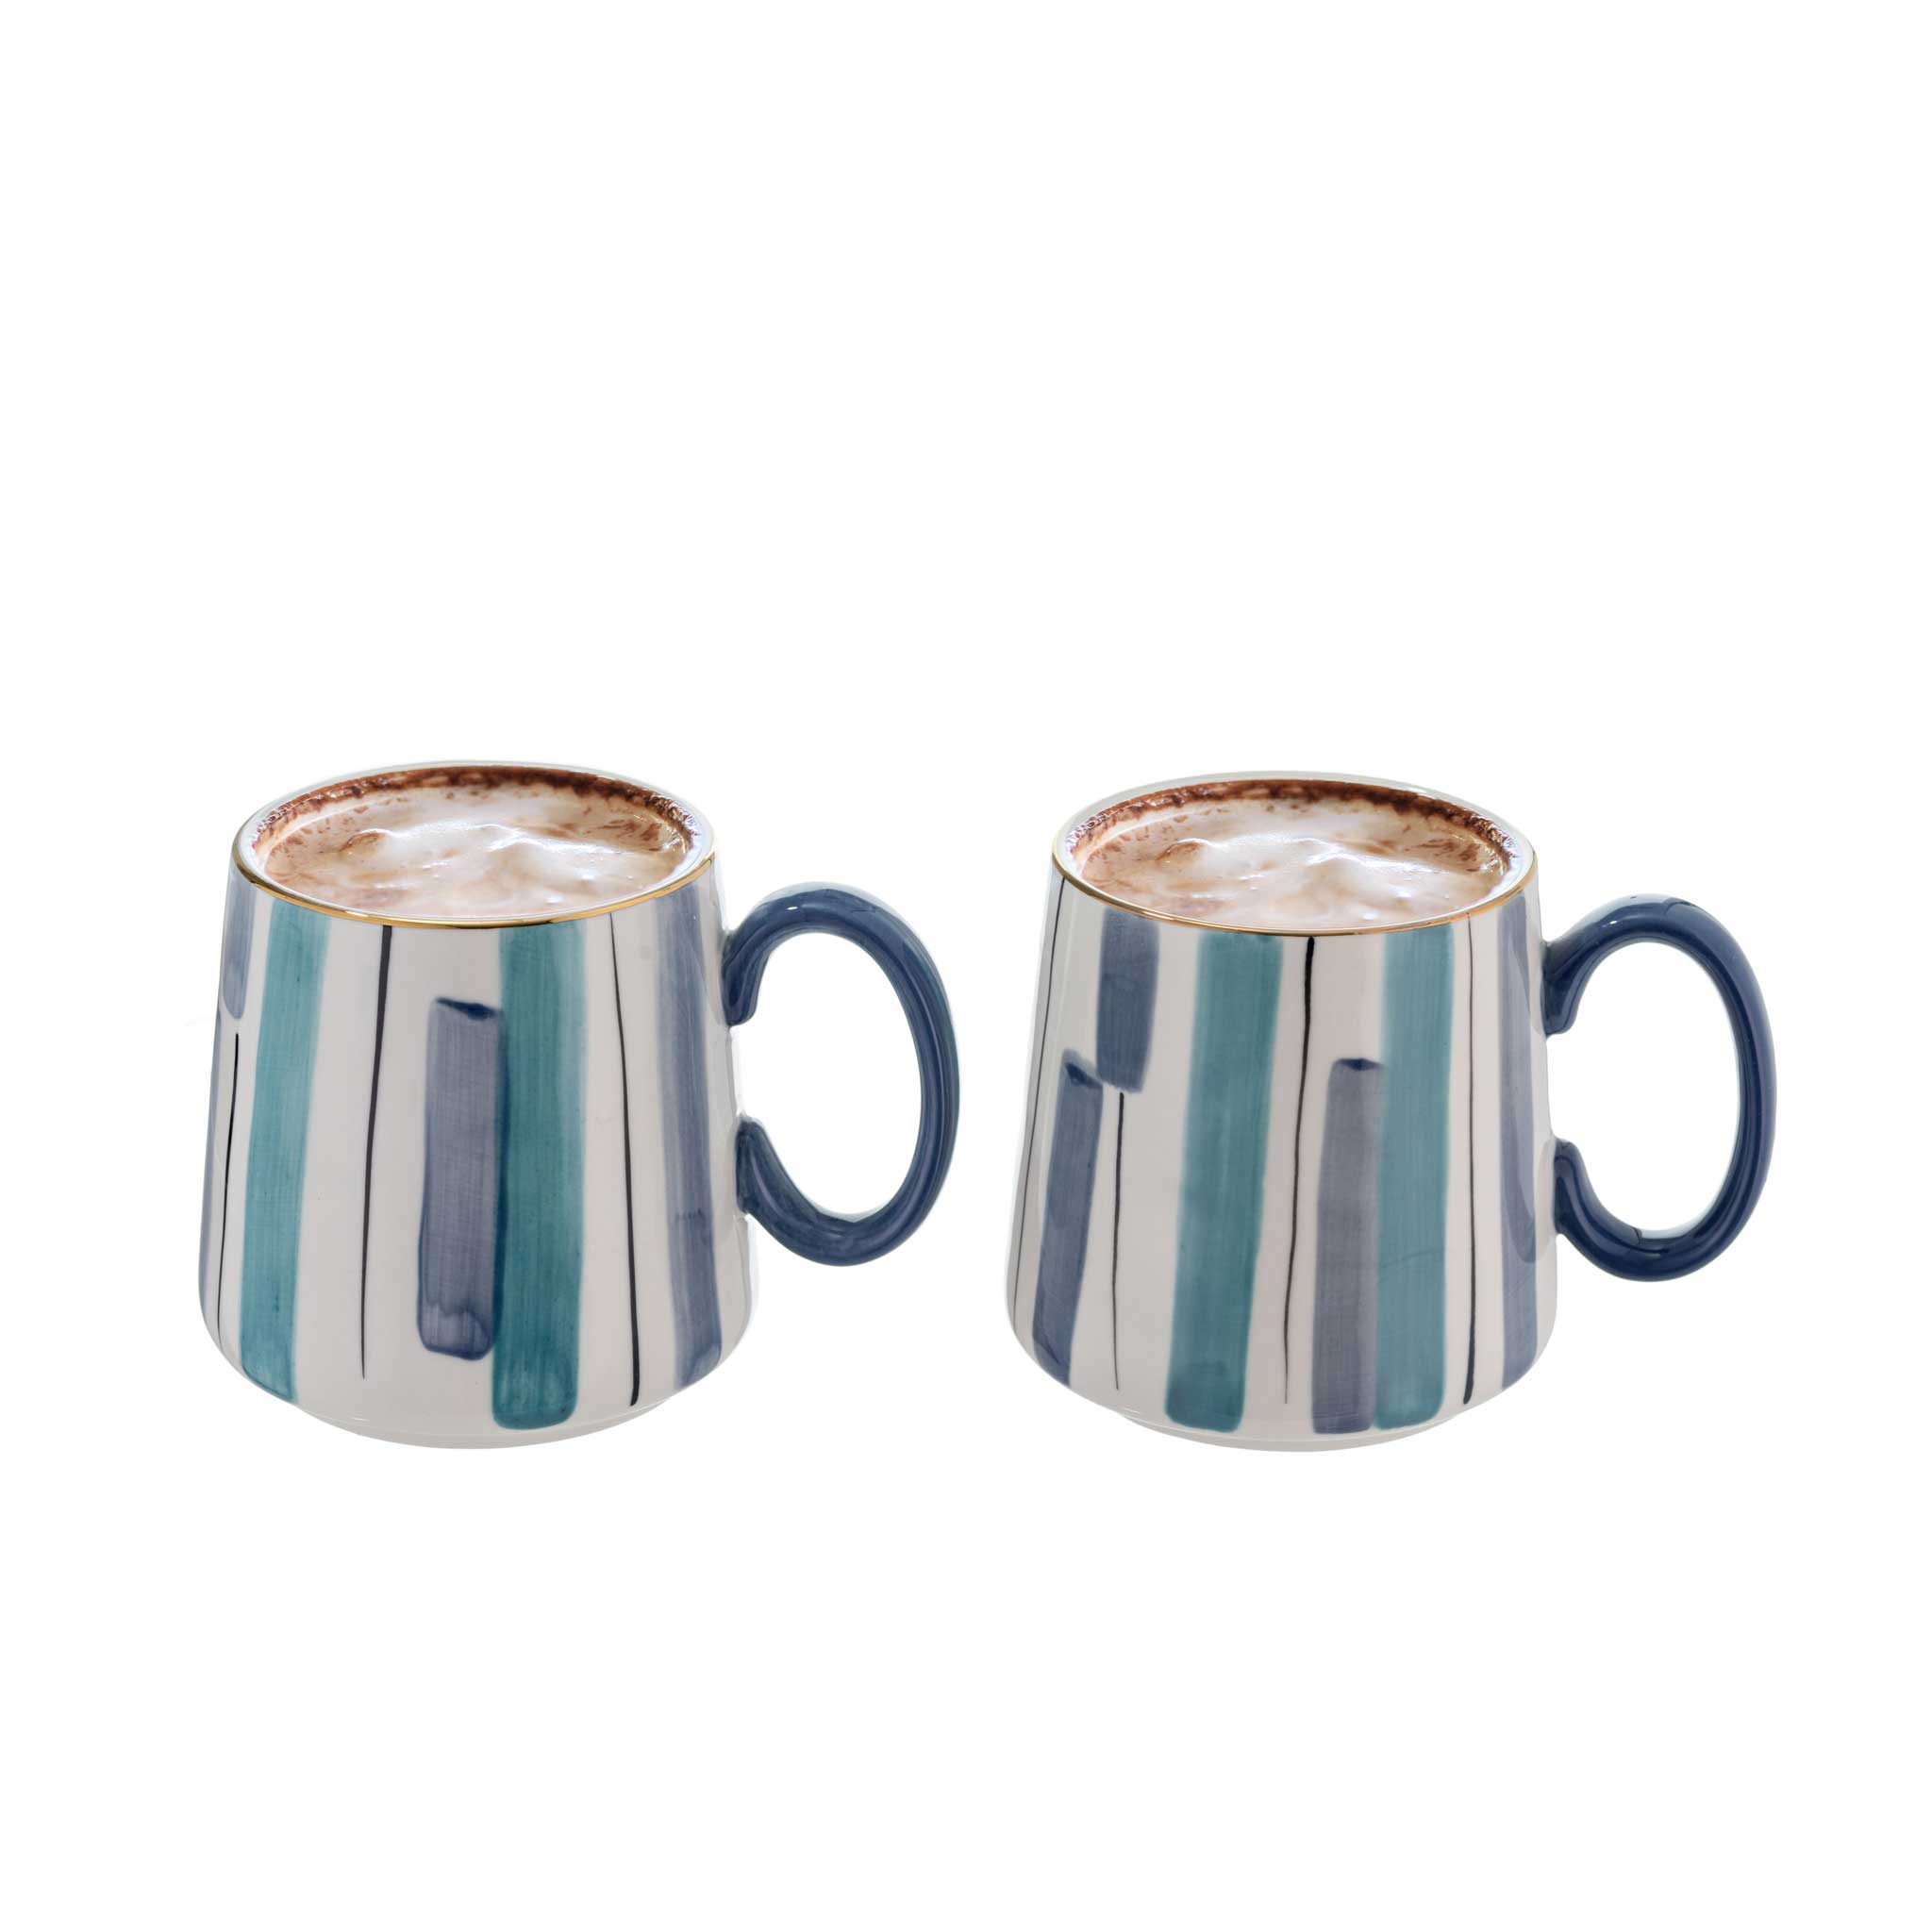 Pair of Blue Striped Mugs from China Blue